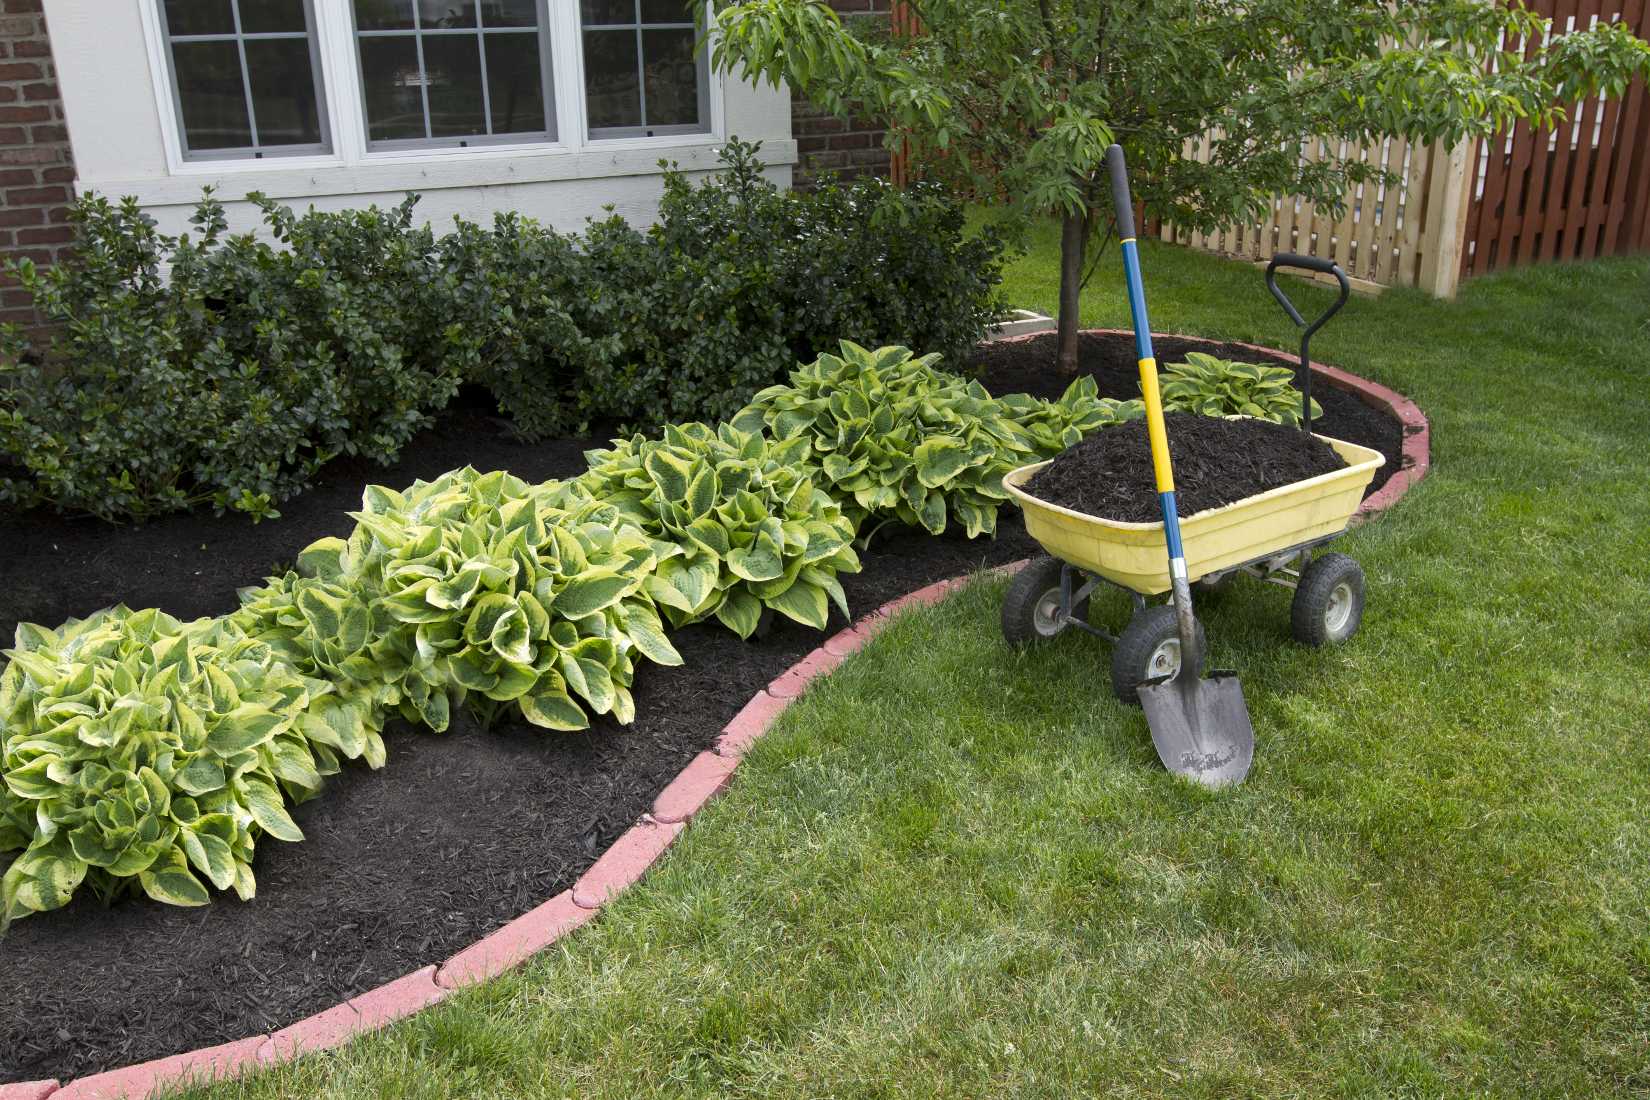 A wheelbarrow of topsoil and shovel sit next to a flowerbed of hostas.